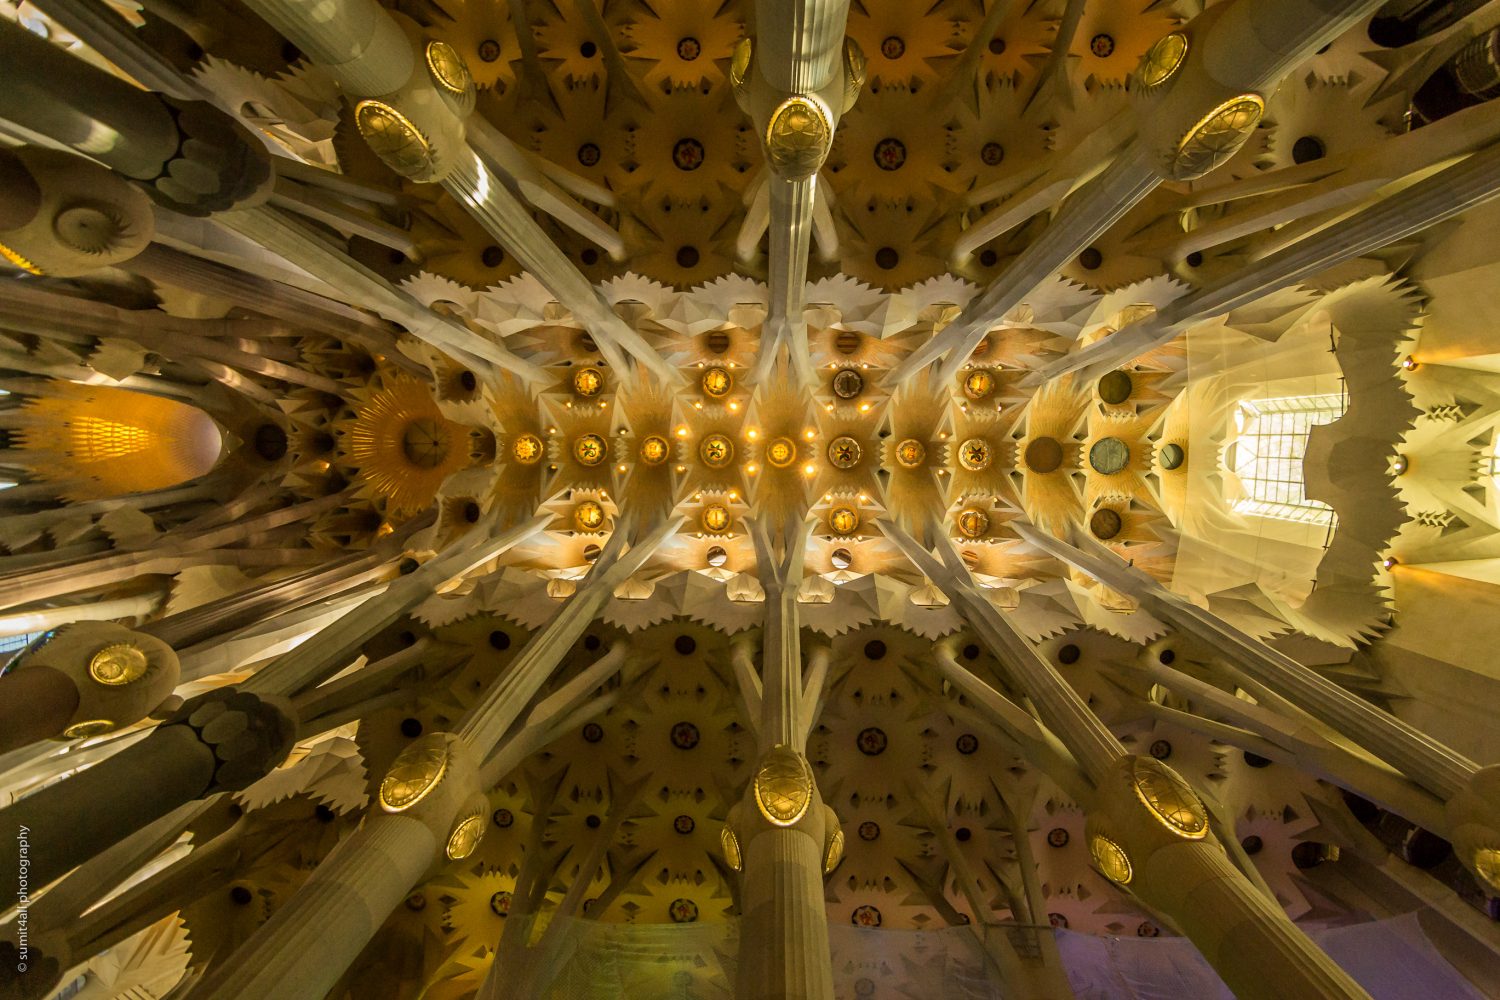 The inside of the Sagrada Familia with the remarkable roof in Barcelona Spain